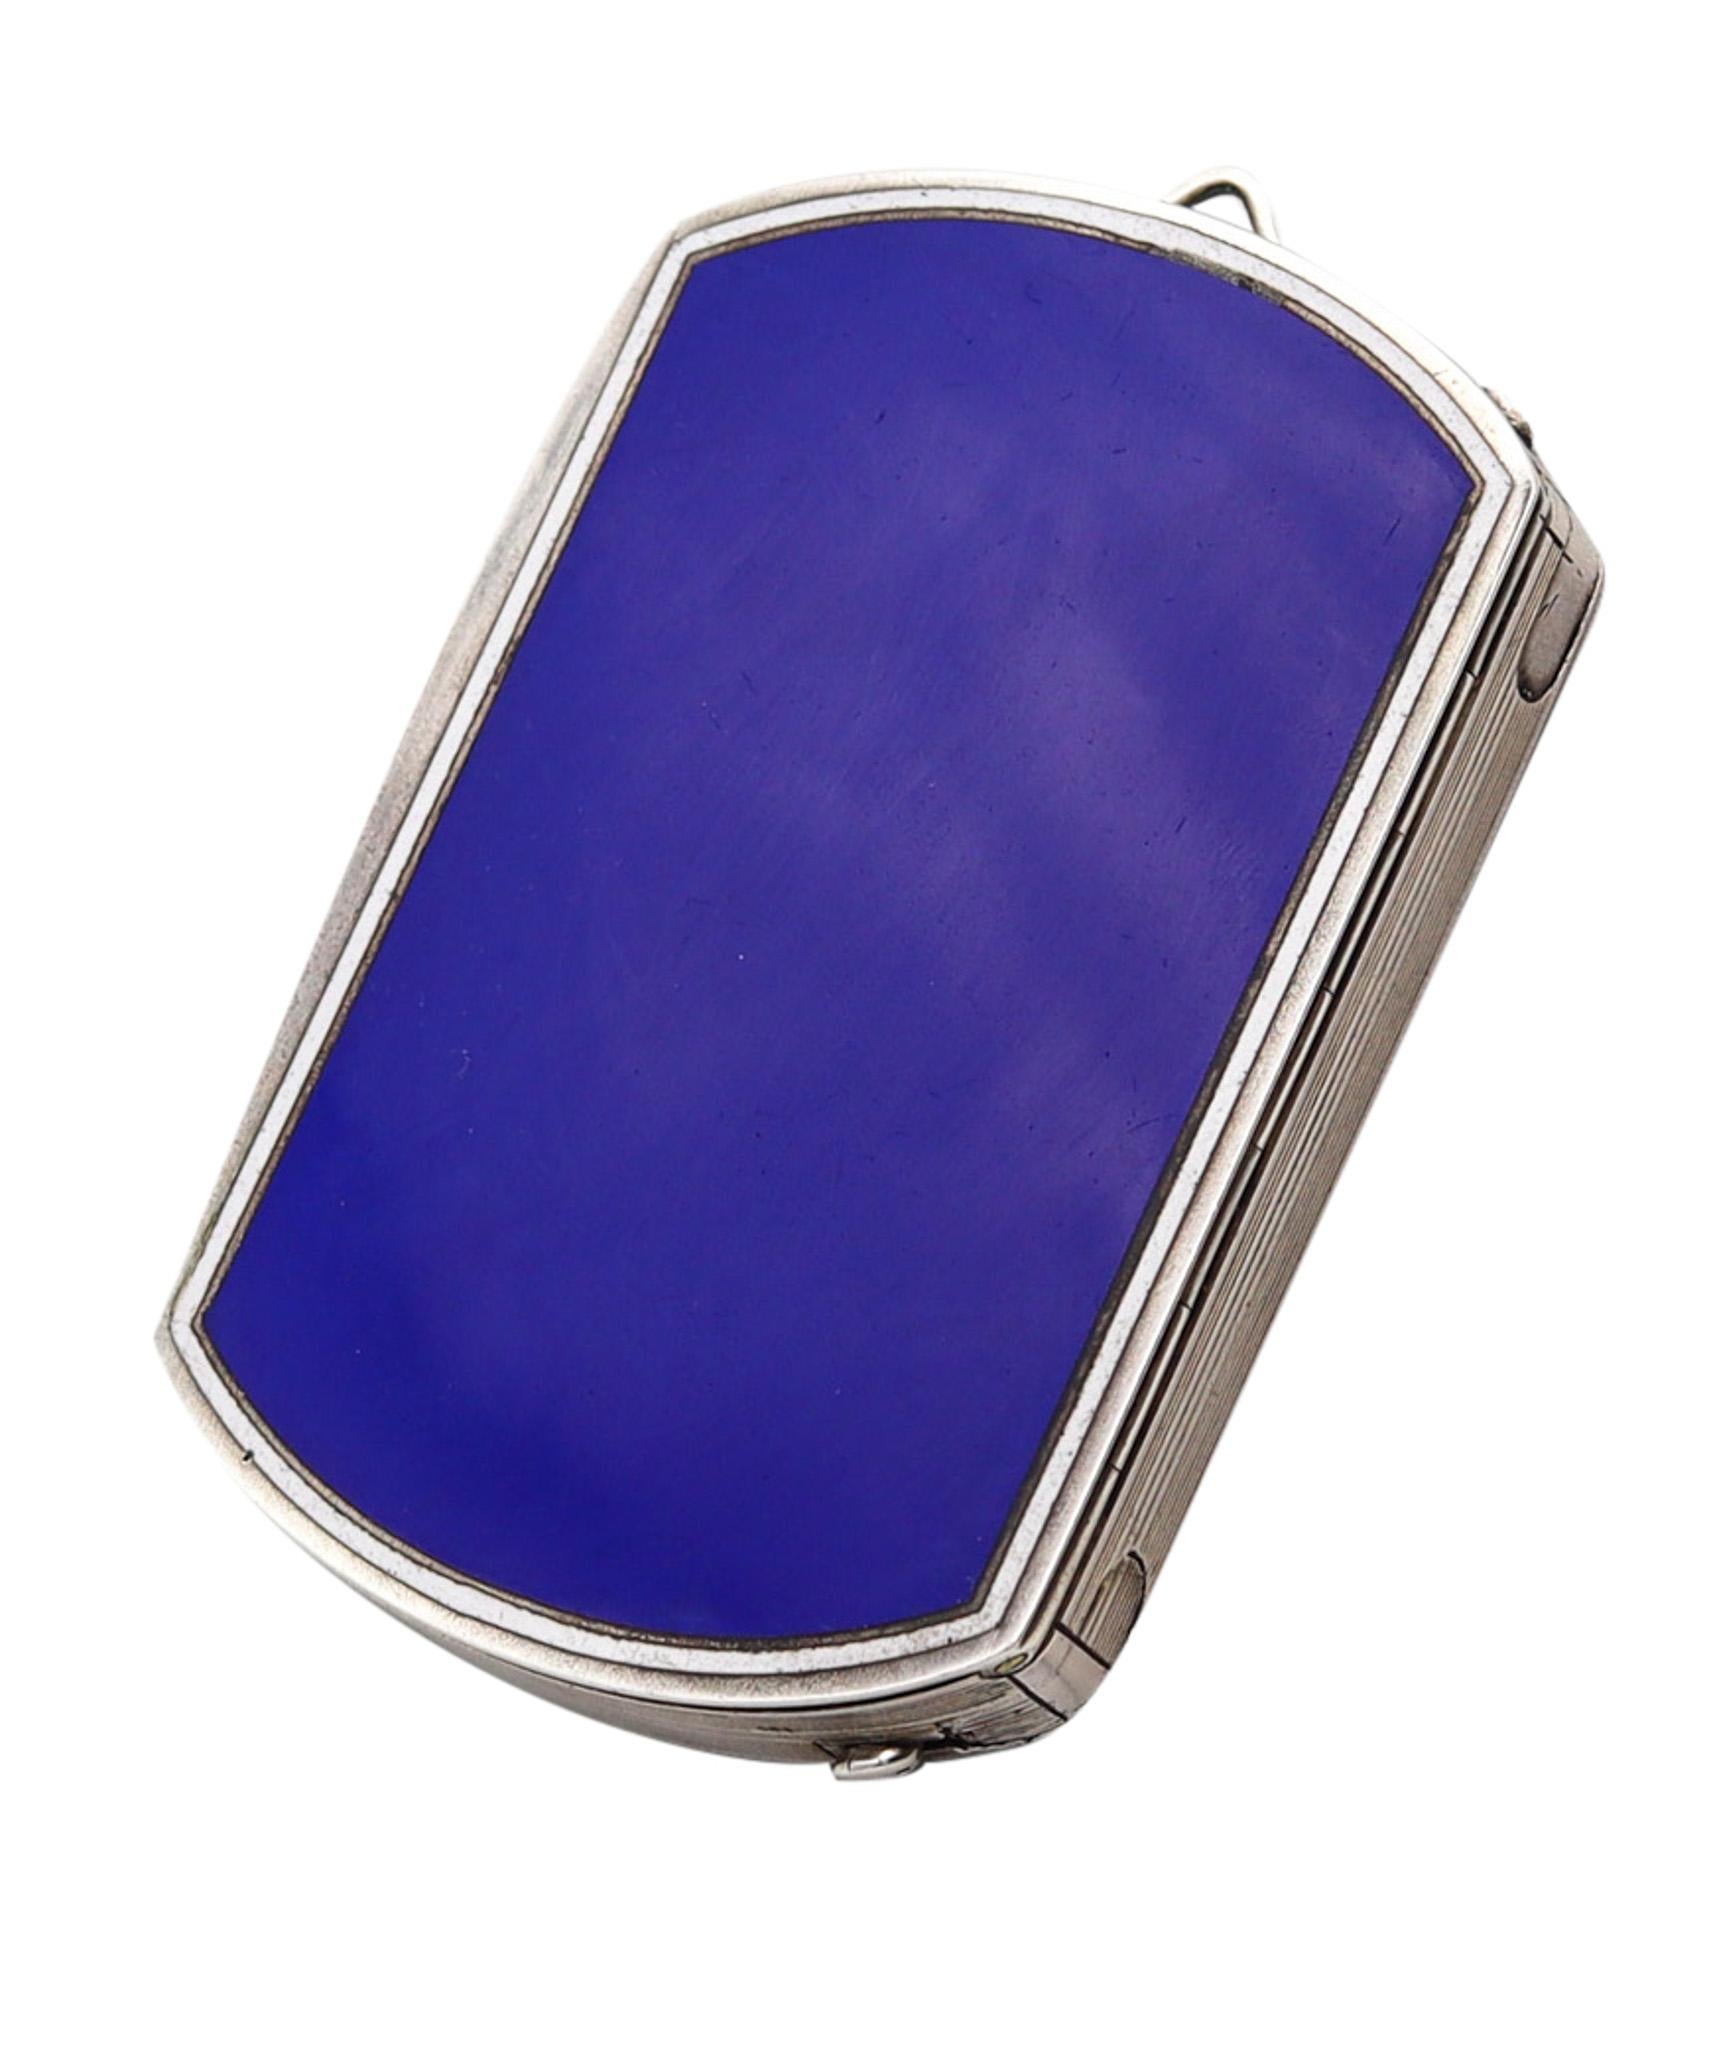 French 1925 Art Deco Enameled Mechanical Compact Pendant Box In Sterling Silver For Sale